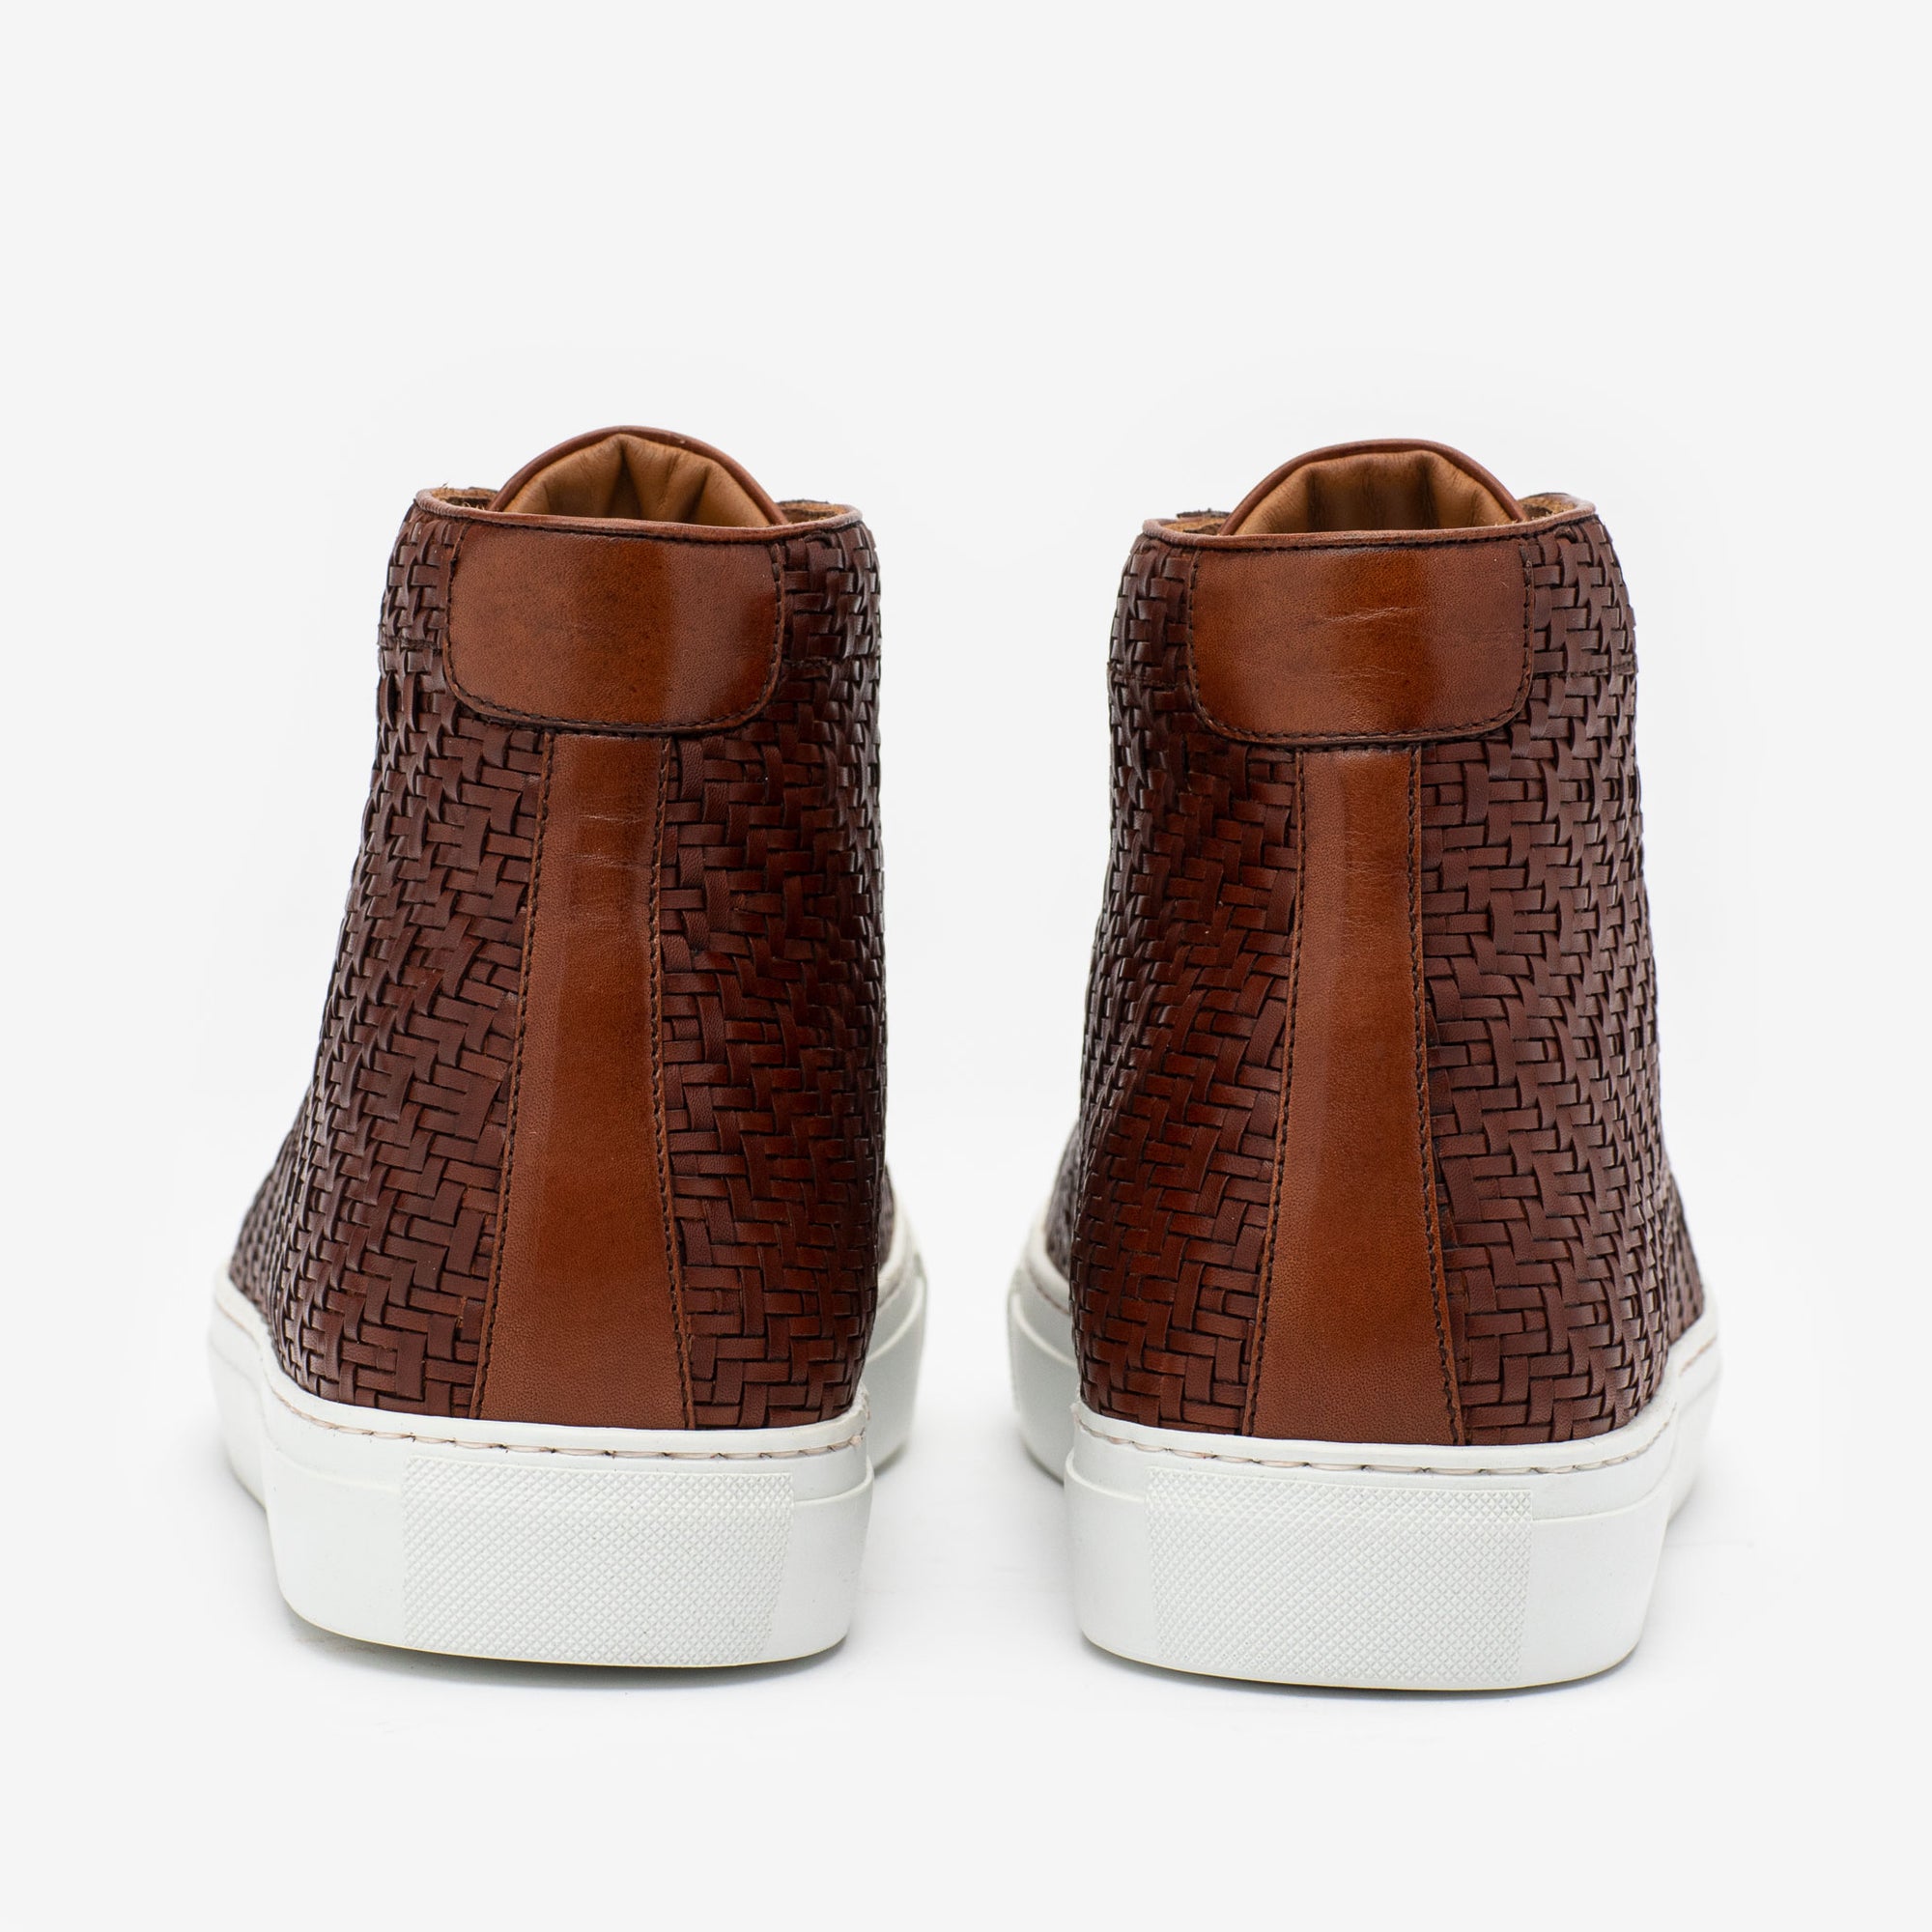 The Hightop Sneaker in Woven Brown Leather | TAFT